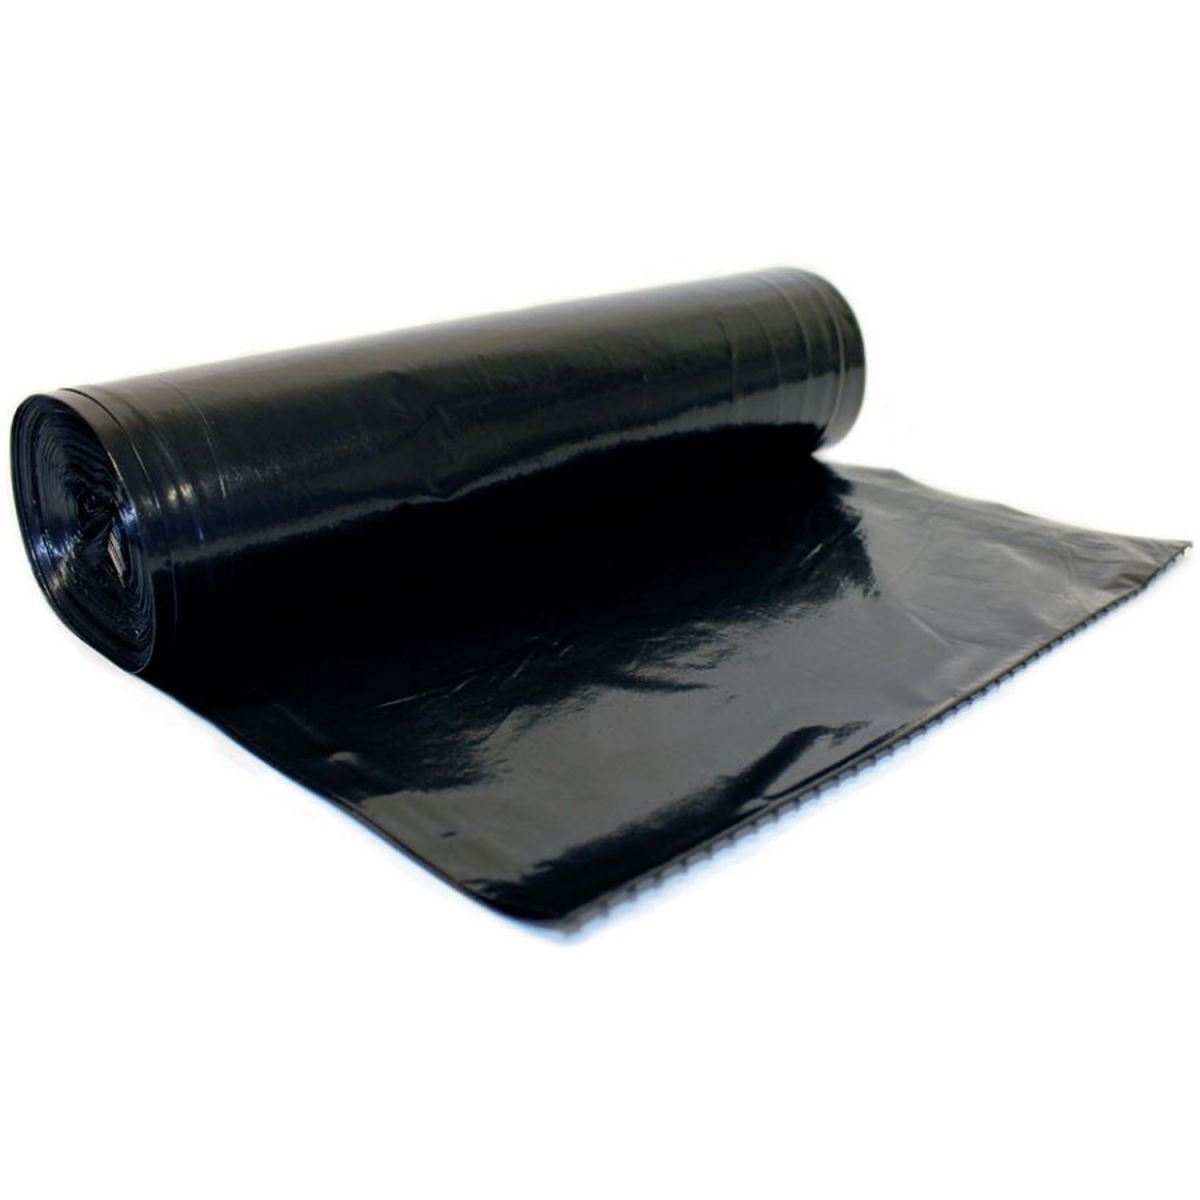 60 GALLON 1.5 MIL 38 IN. X 58 IN. BLACK CORDLESS DRUM CAN LINER BAGS 100 PER BOX